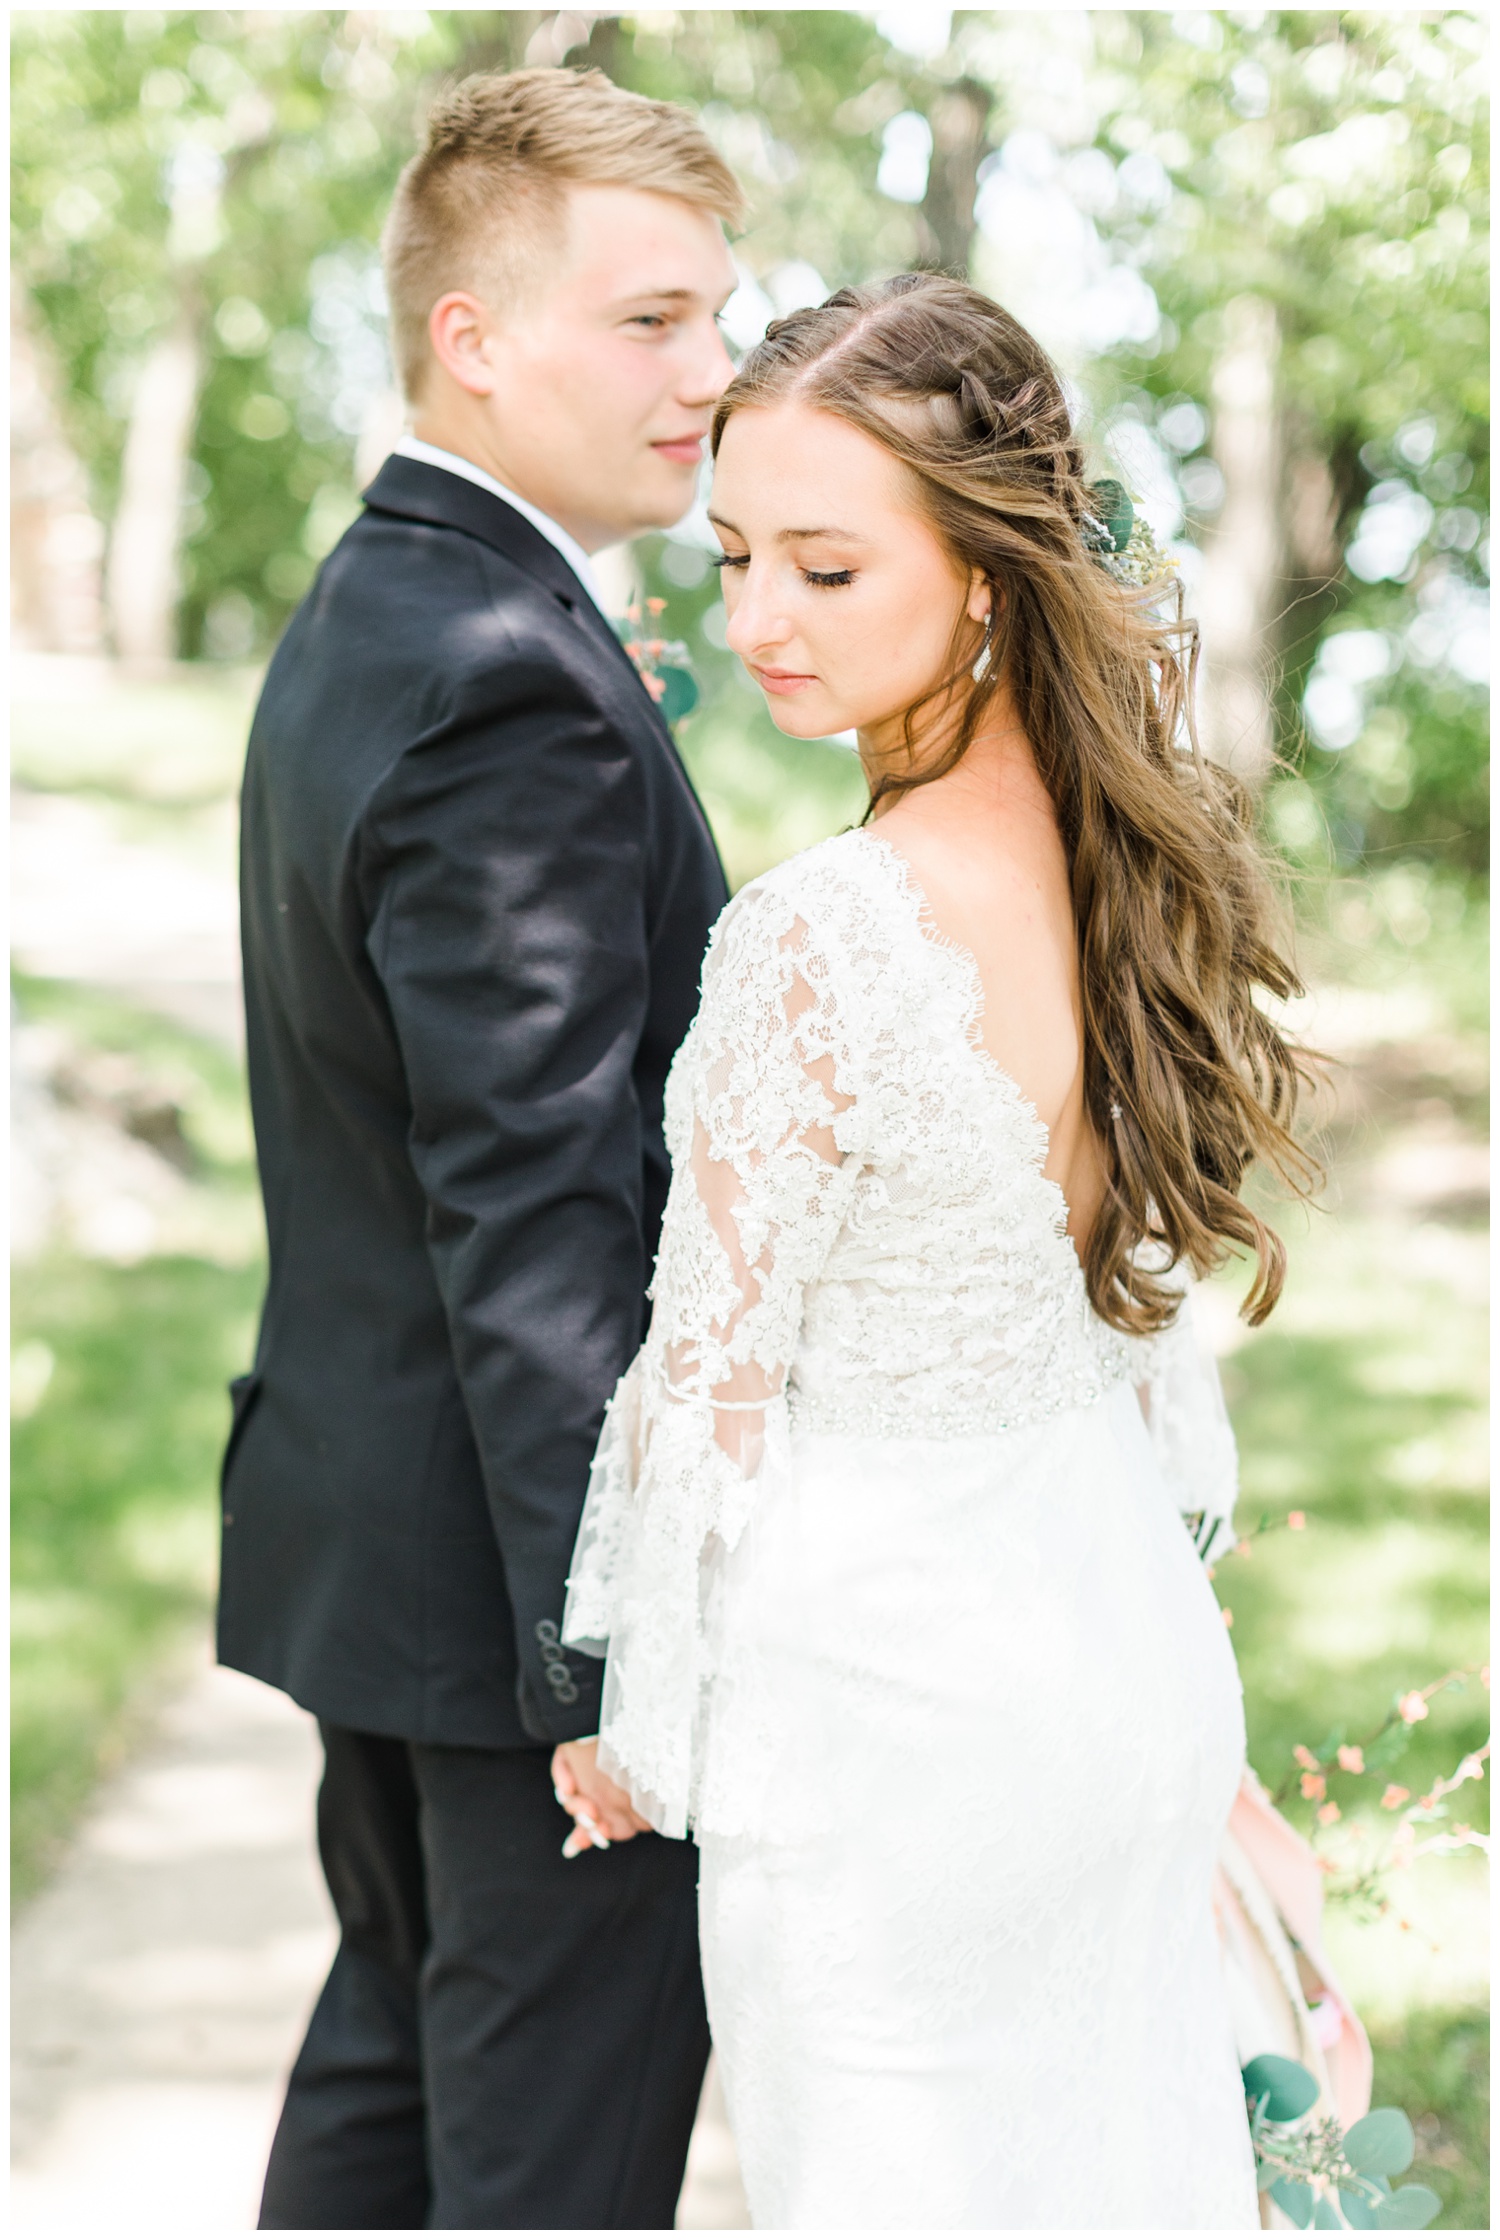 Thad looks back at his bride as they walk along a path at Gull Point State Park | CB Studio